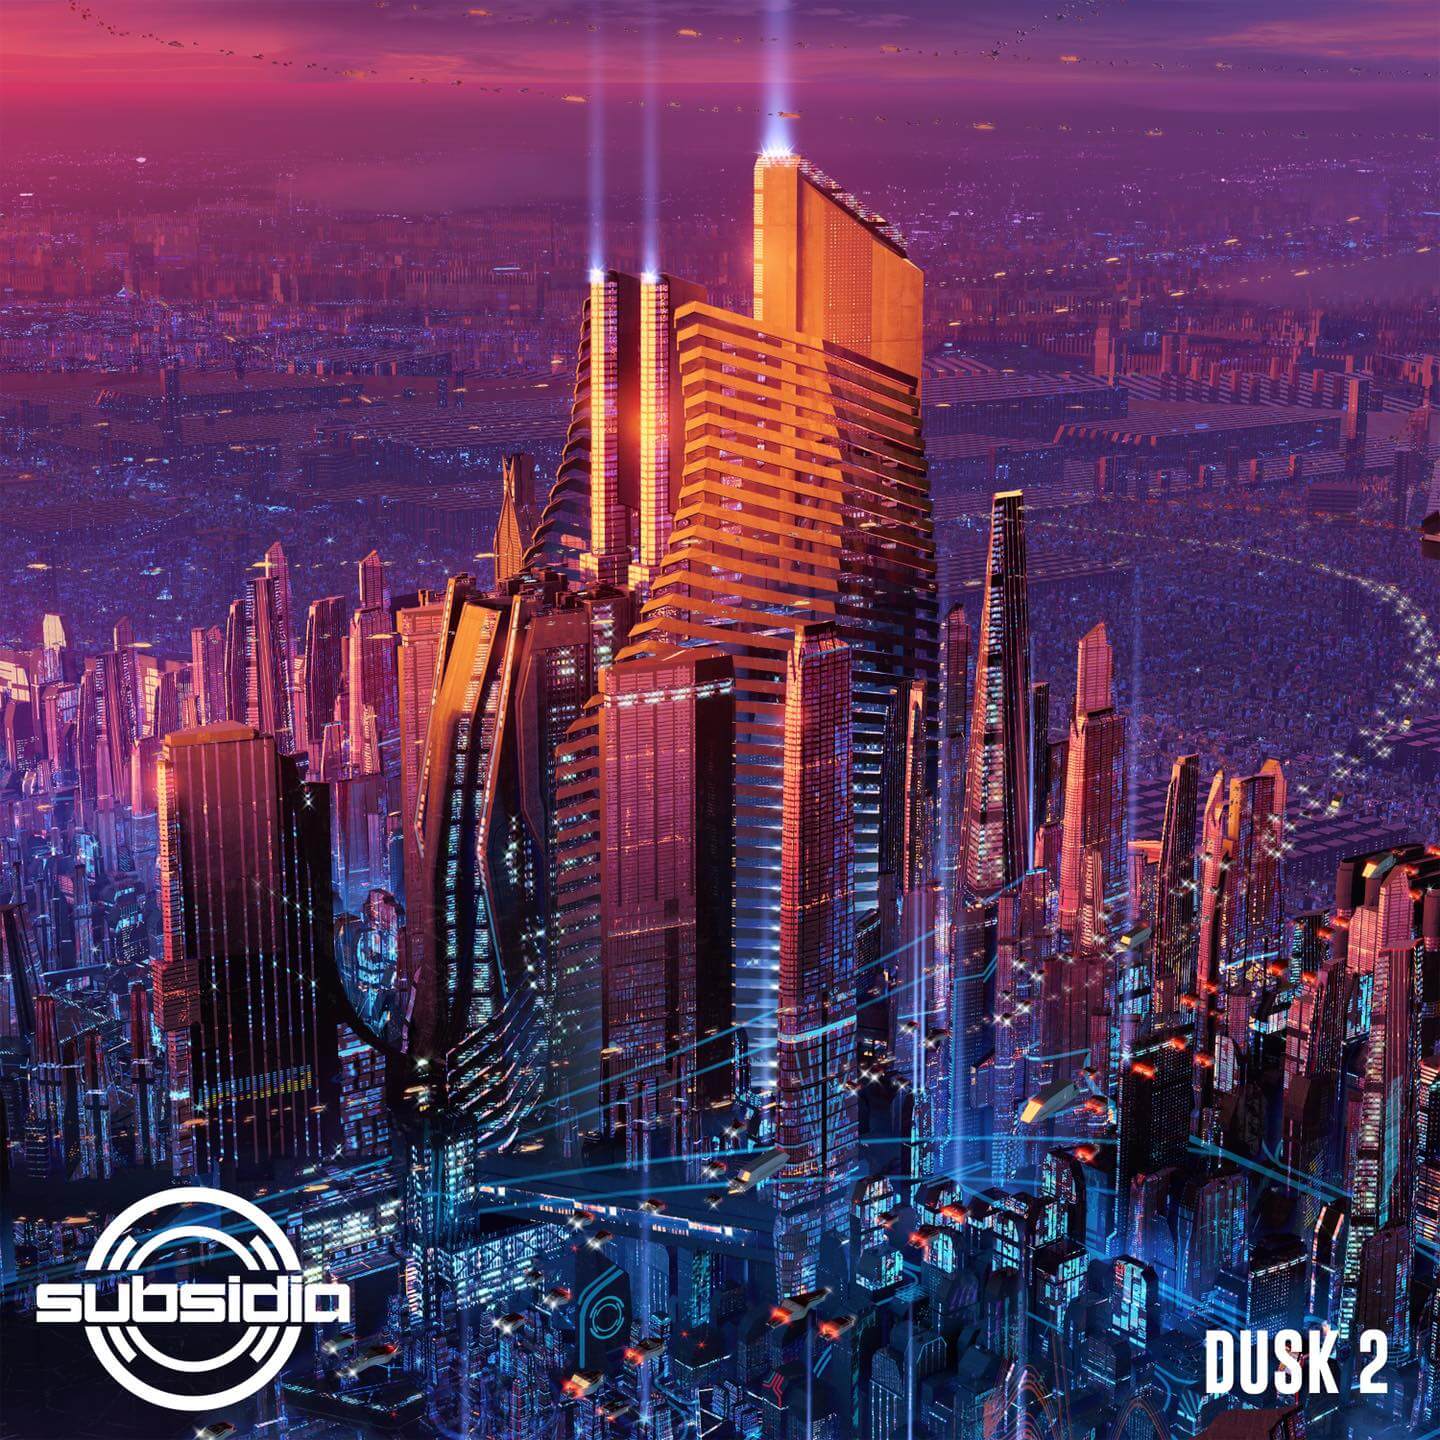 Dusk: Vol 2 On Subsidia Is Full Of Bass Driven Hits